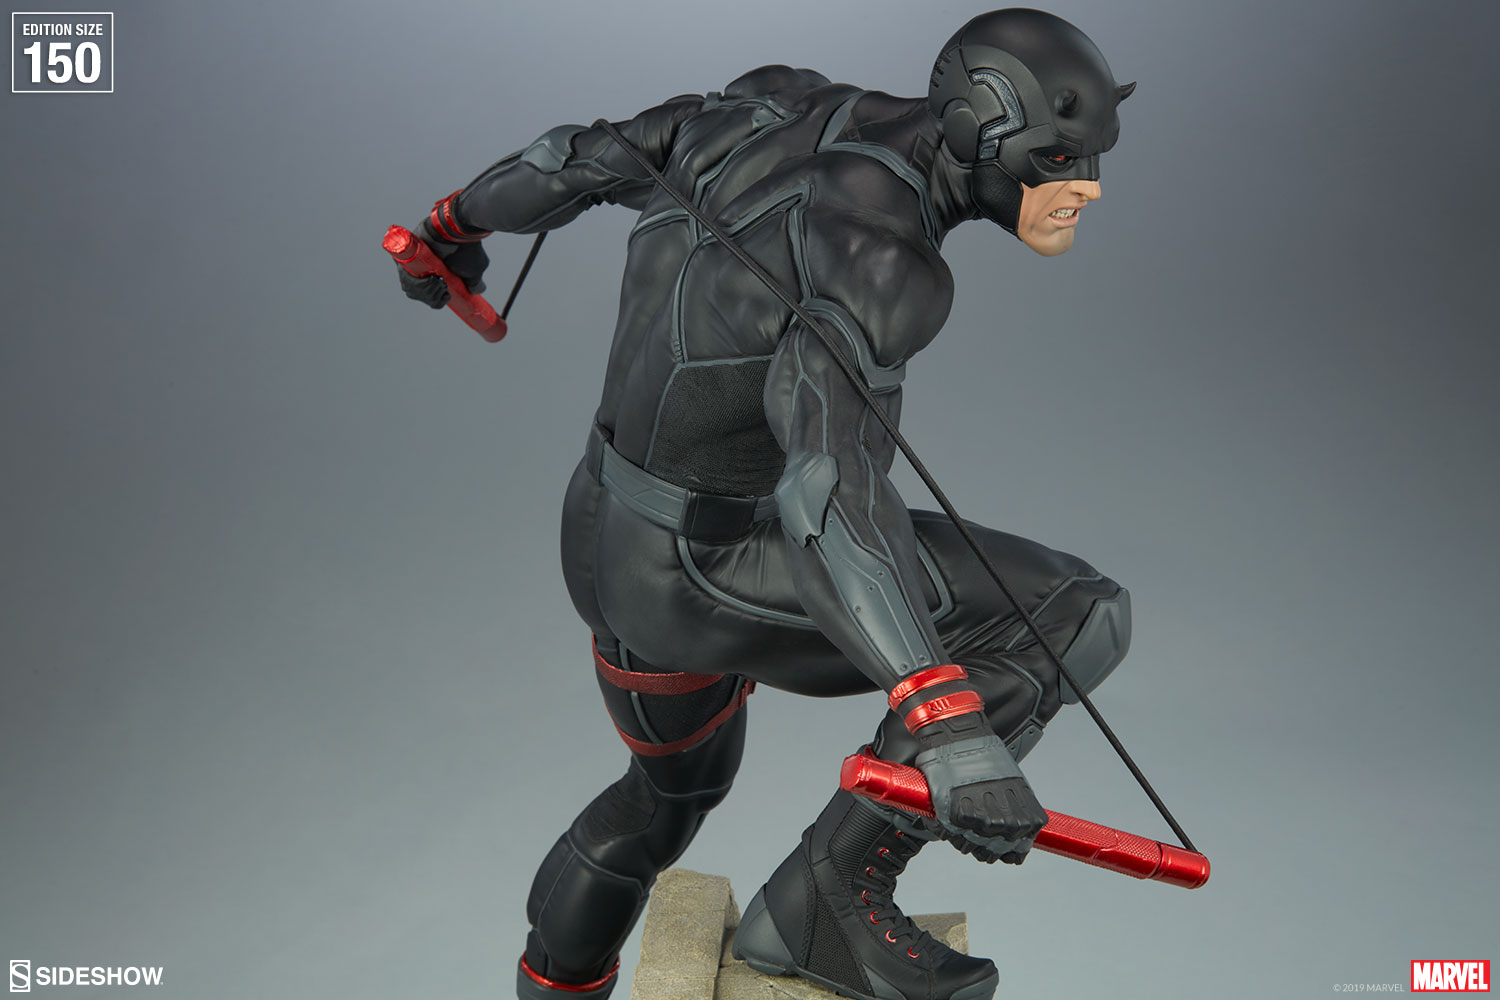 https://www.sideshow.com/storage/product-images/3005392/daredevil-shadowlands_marvel_gallery_5ce6d416f15d0.jpg